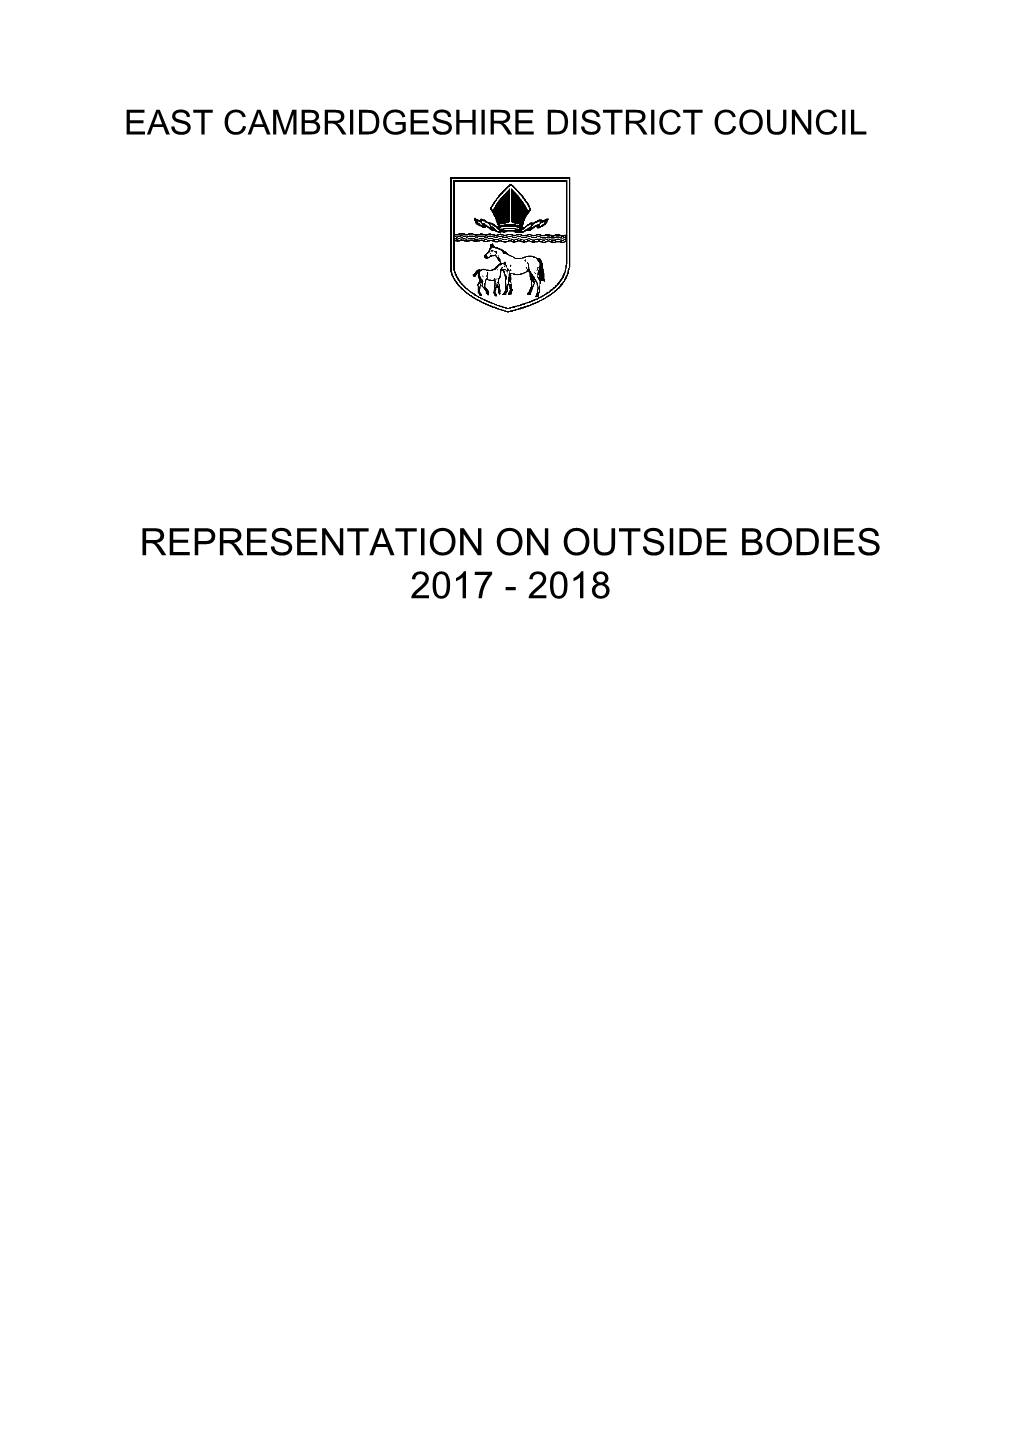 Representation on Outside Bodies 2017 - 2018